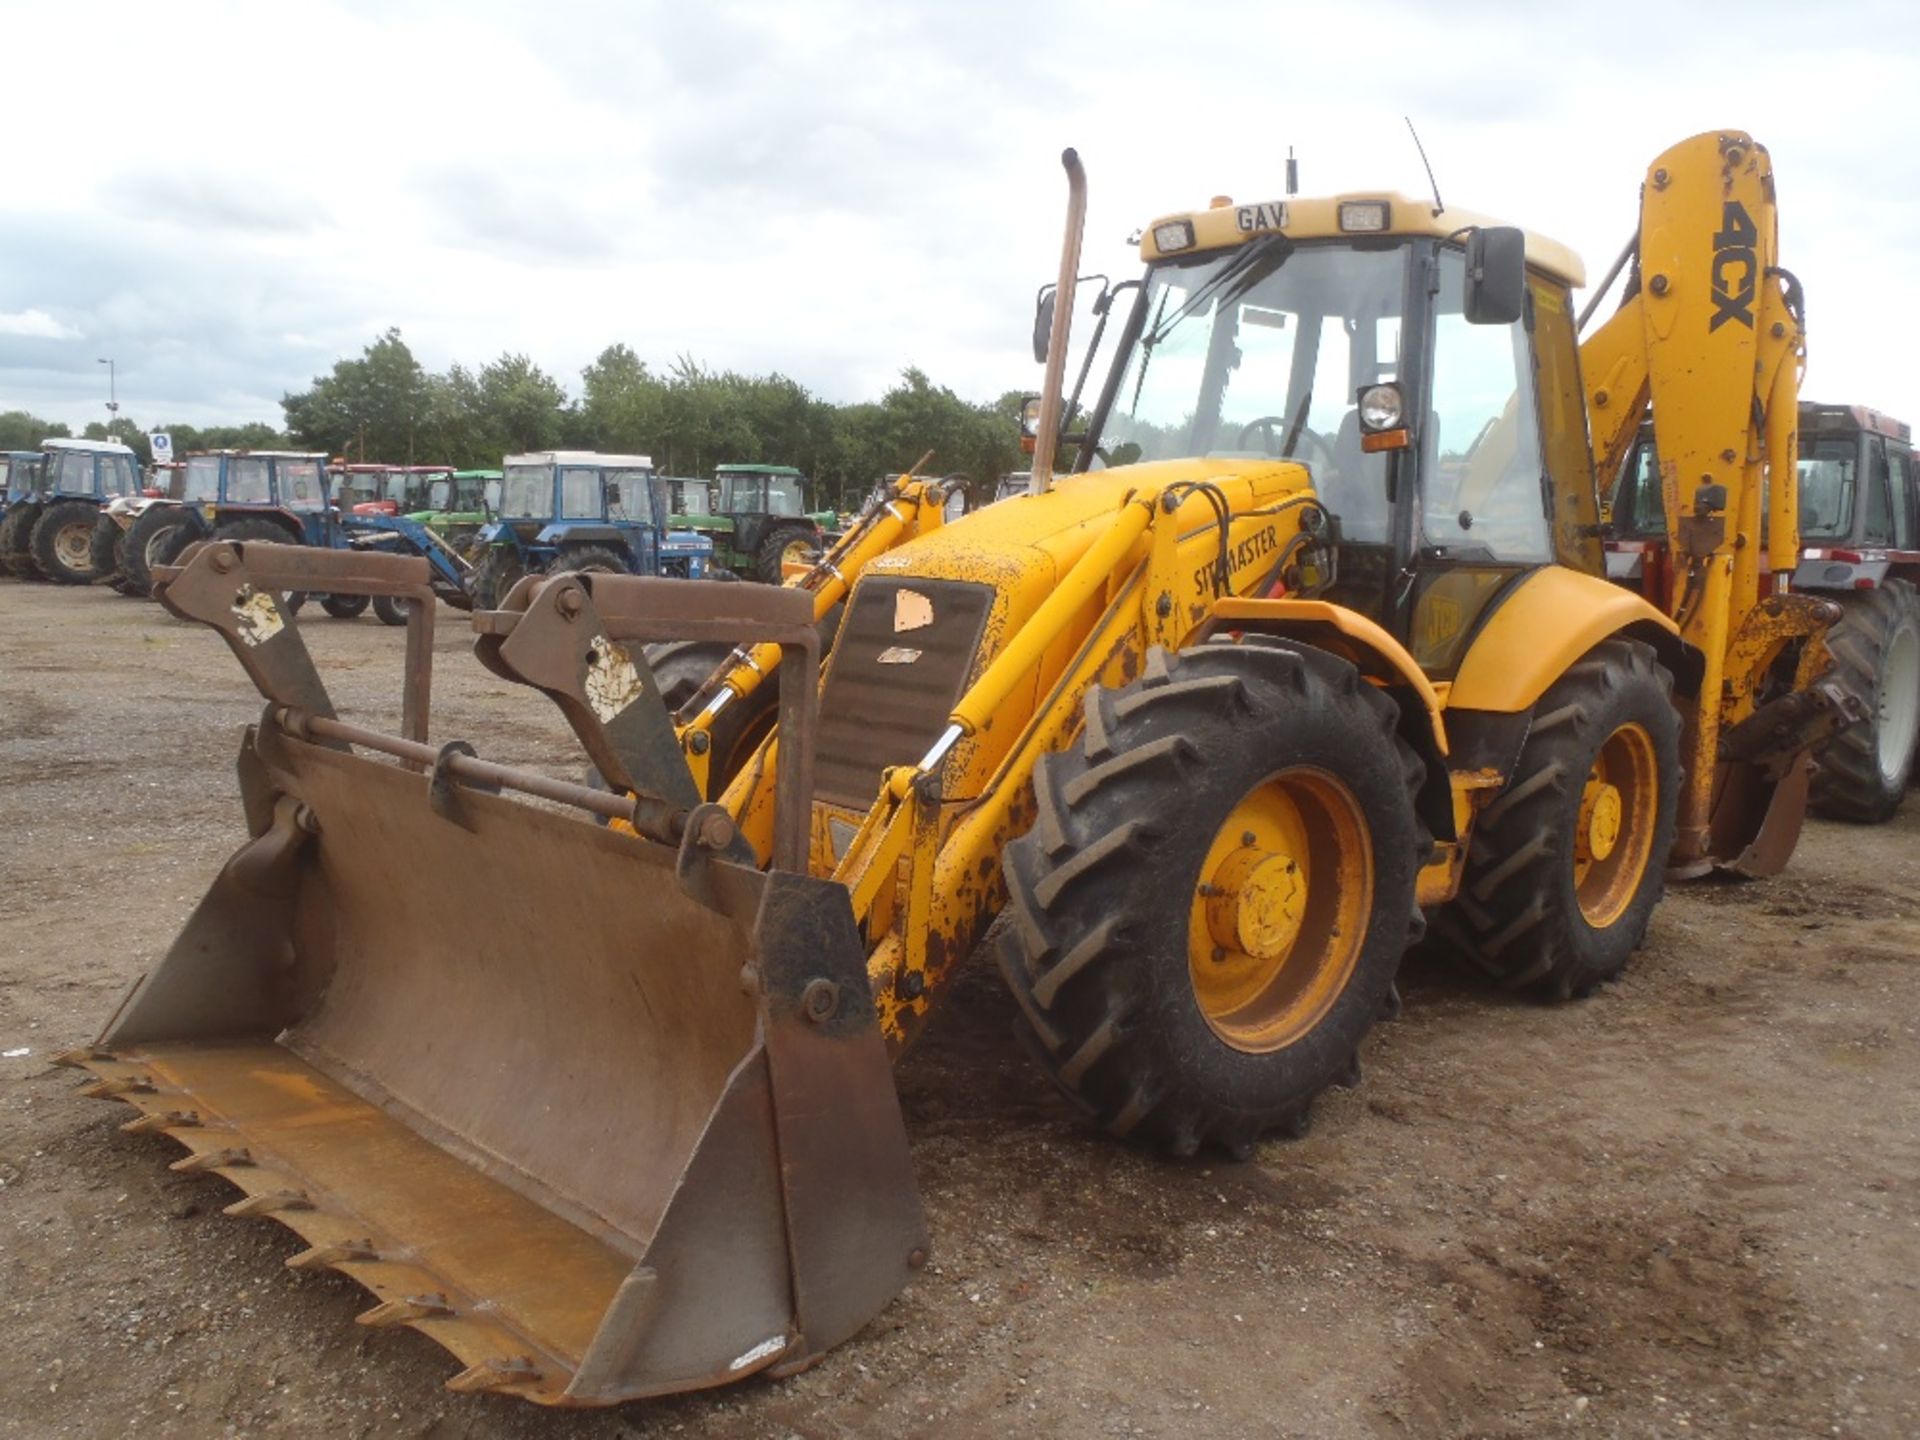 JCB 4CX 6030 Hrs. 1 owner from new. Reg No. R546 RRS Ser No 0471778